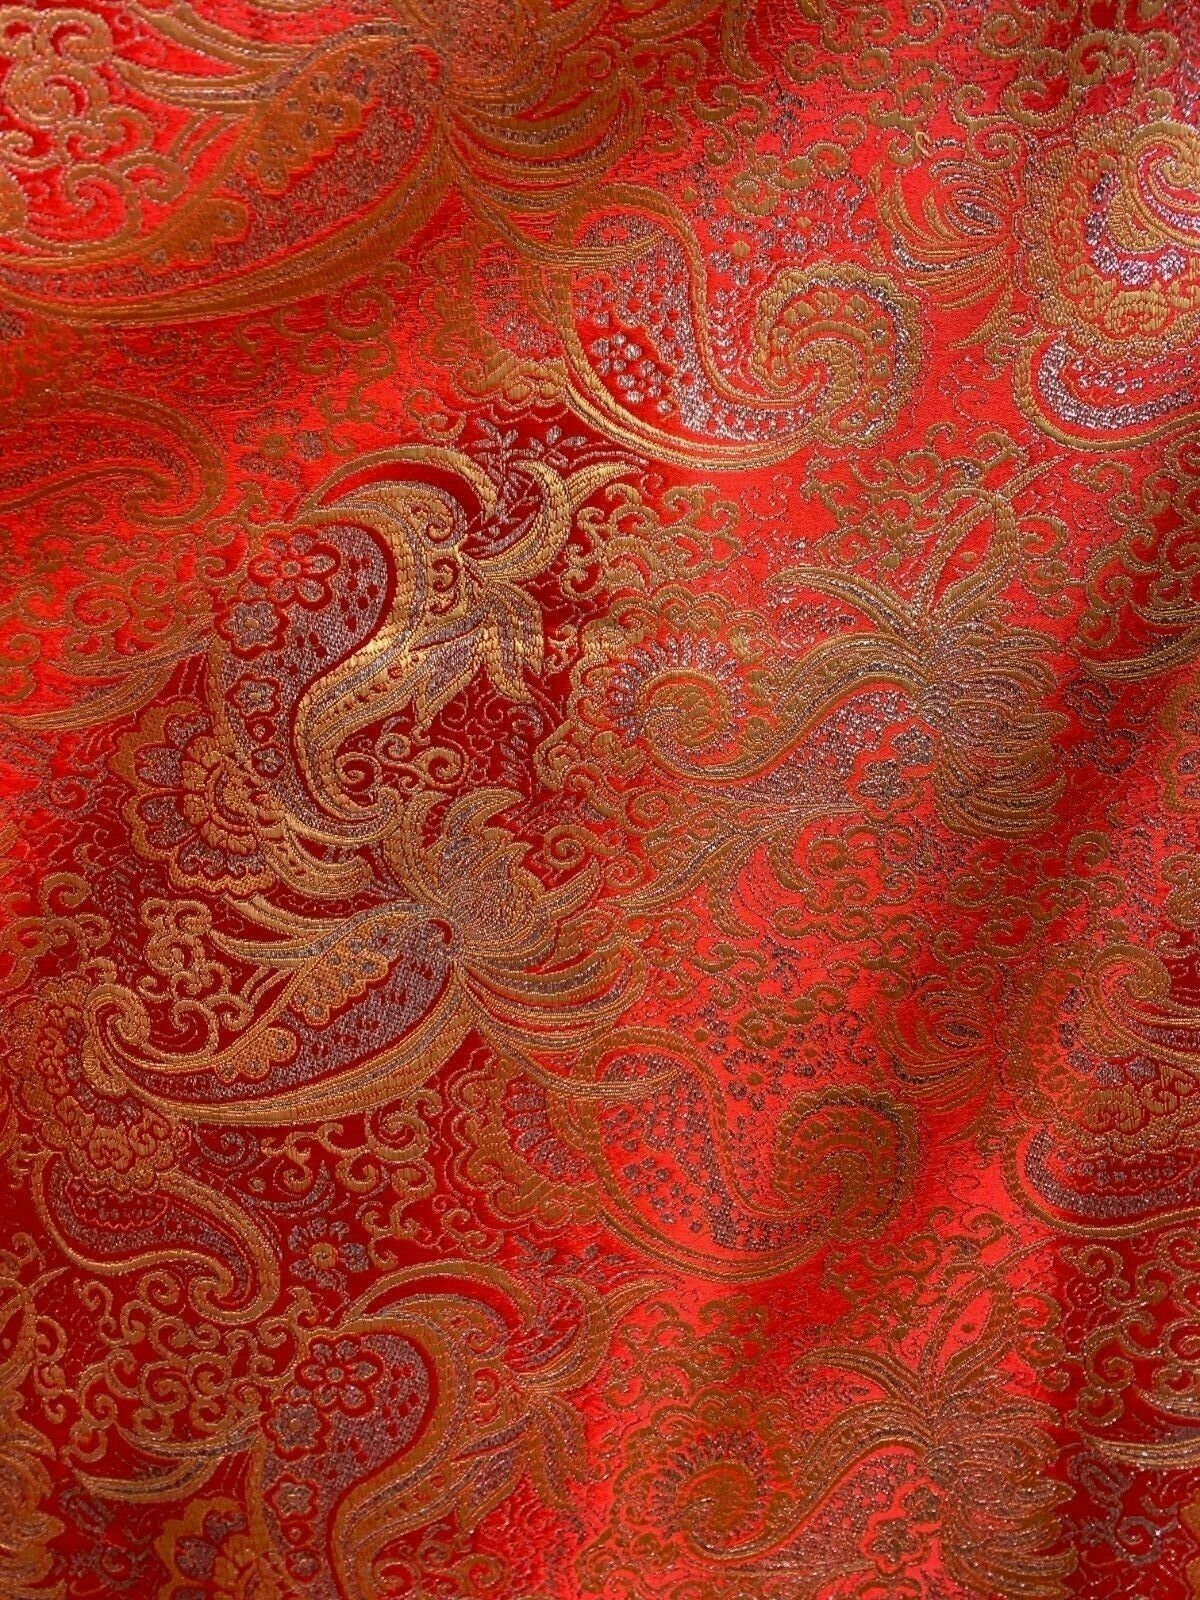 Red Gold Silver Metallic Paisley Brocade Fabric 60 In. Sold - Etsy